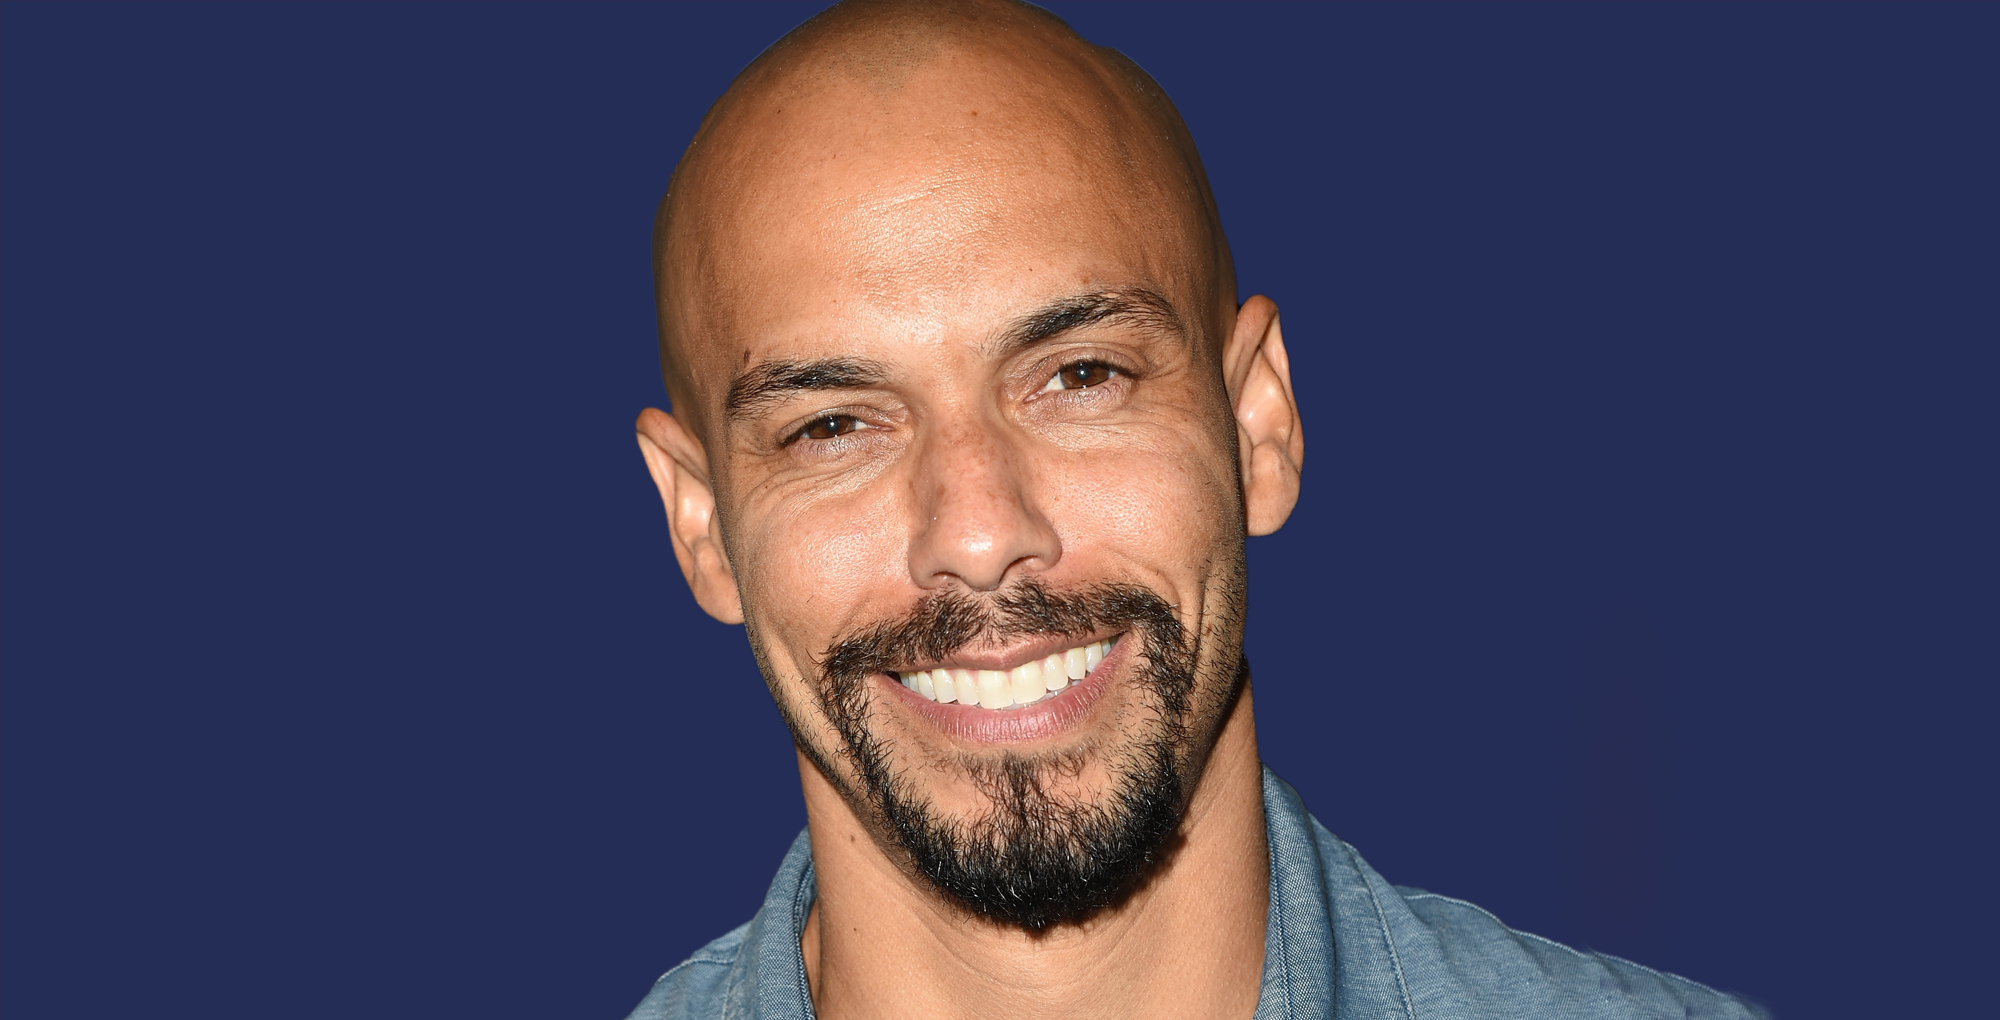 bryton james plays devon winters on young and the restless.